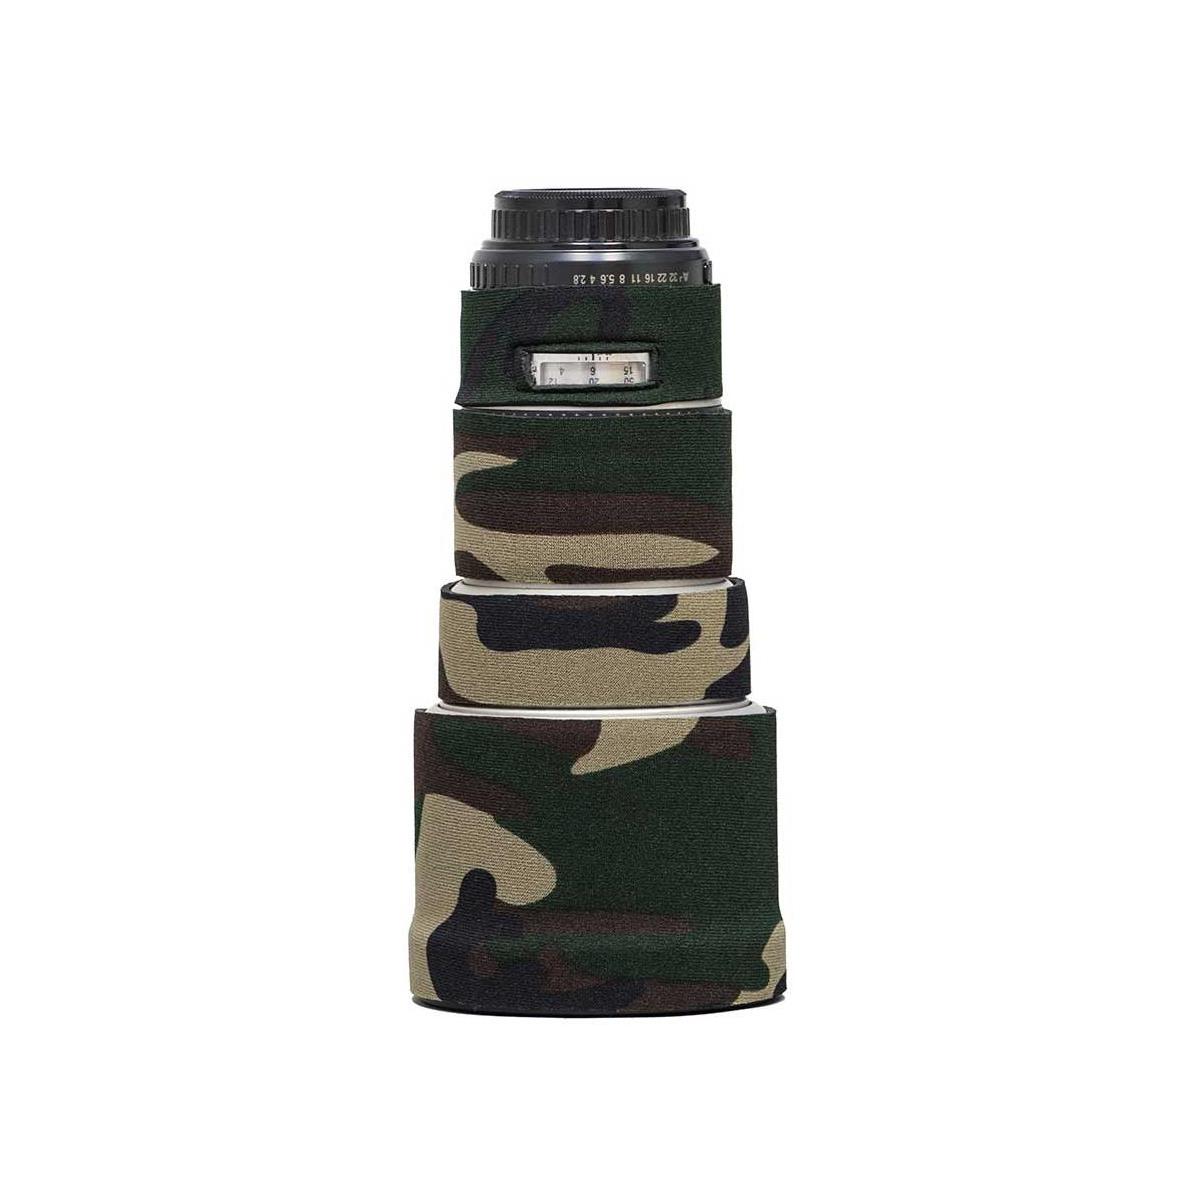 

LensCoat Cover for Pentax FA 200mm f/2.8 Lens, Forest Green Camo